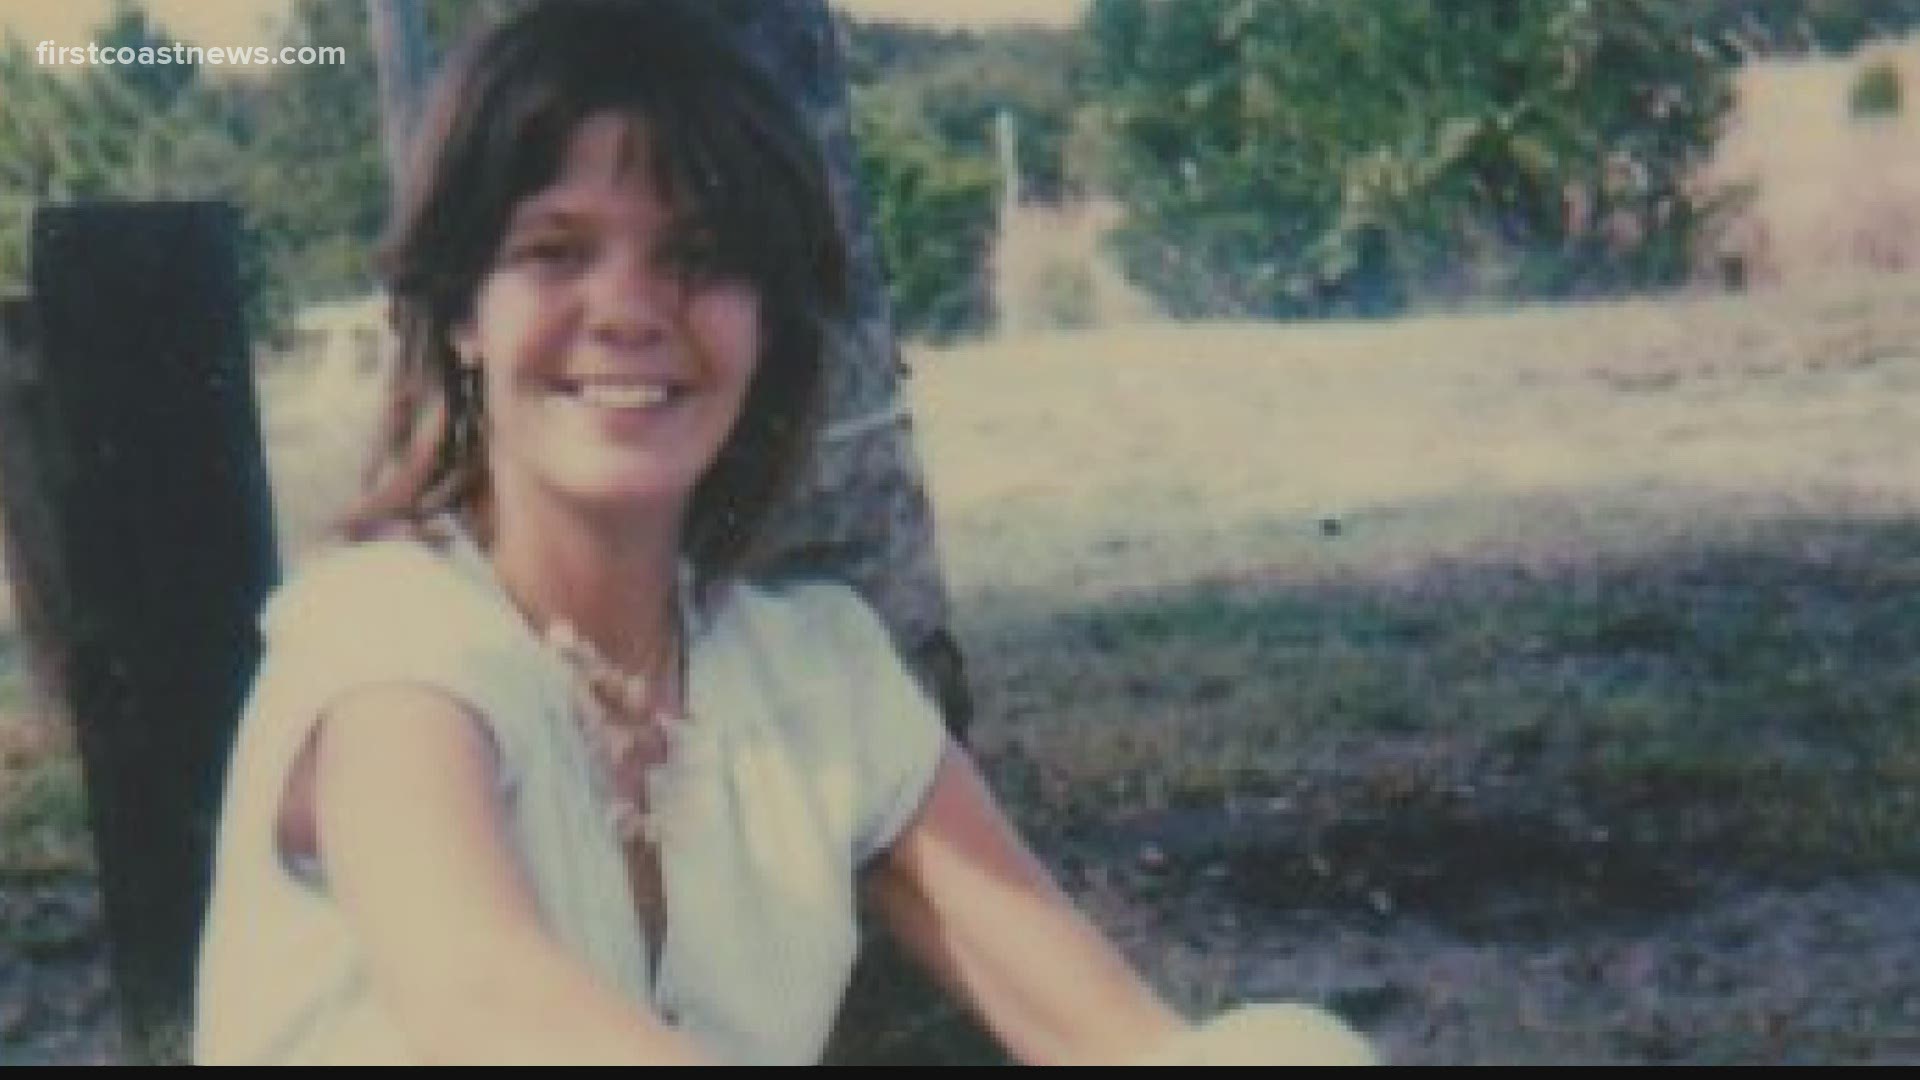 Her bones were found in the Bryceville woods in 2009, but it would be a decade before deputies knew her identity.  The question remains, what happened to her?